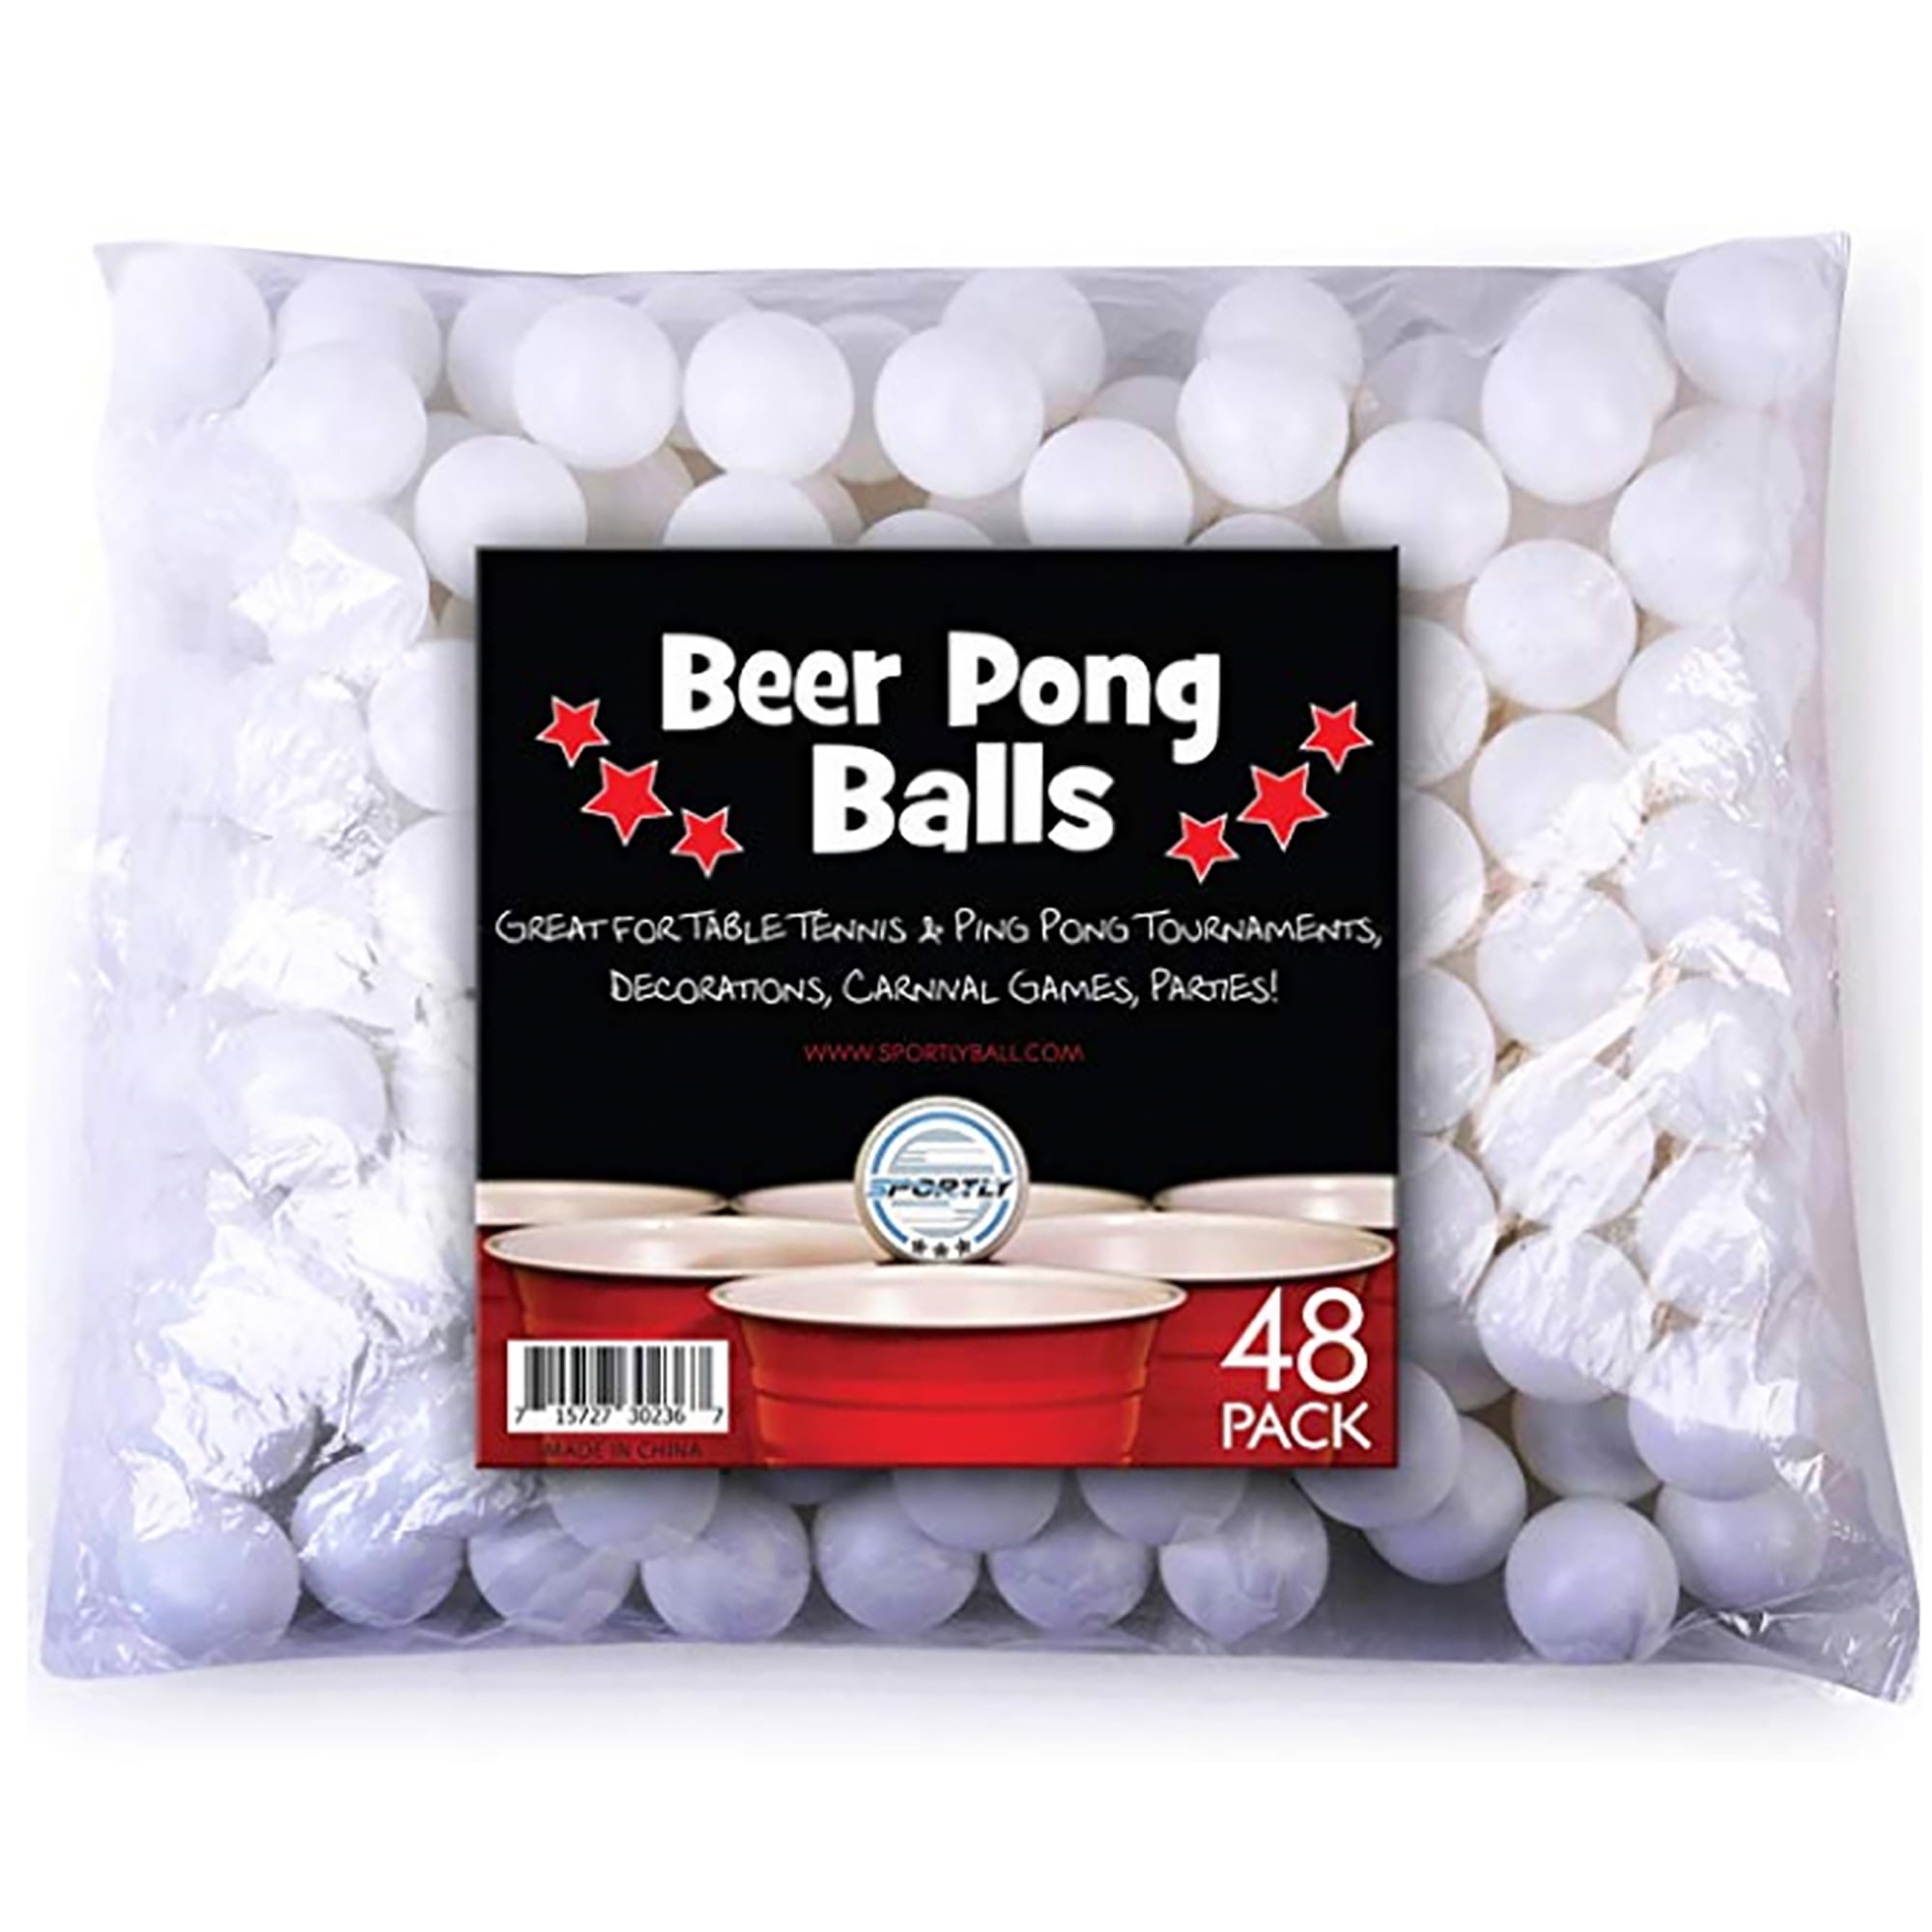 Beer Pong Balls Ping White Practice Table Tennis Play Drinking Game Party Bulk 